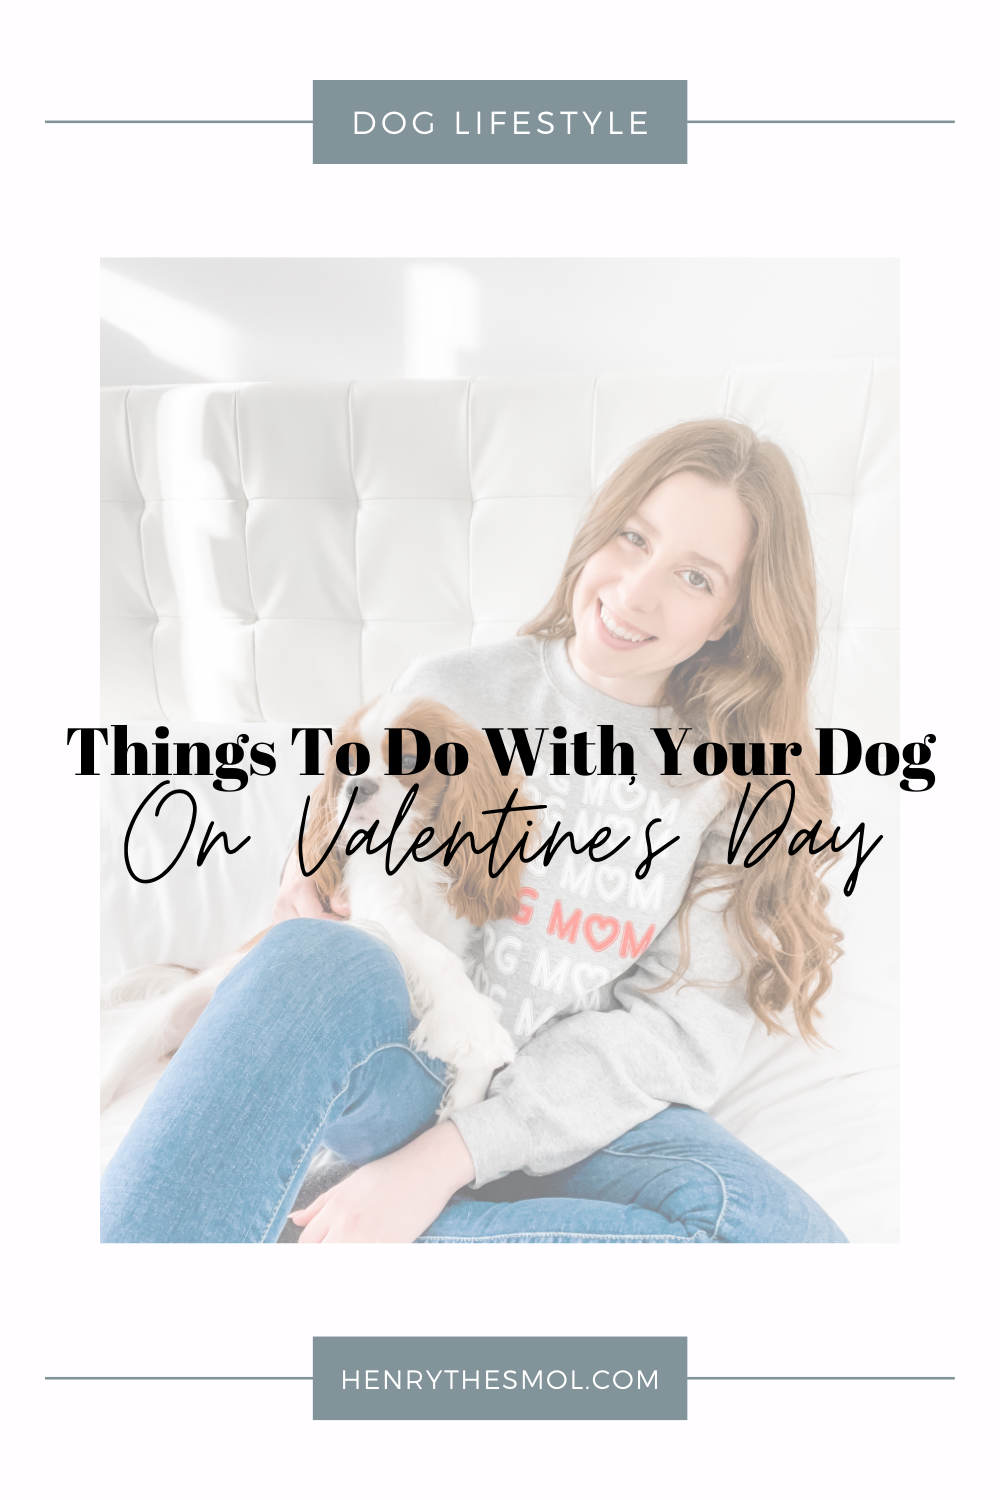 10 Ways To Spend Quality Time With Your Dog